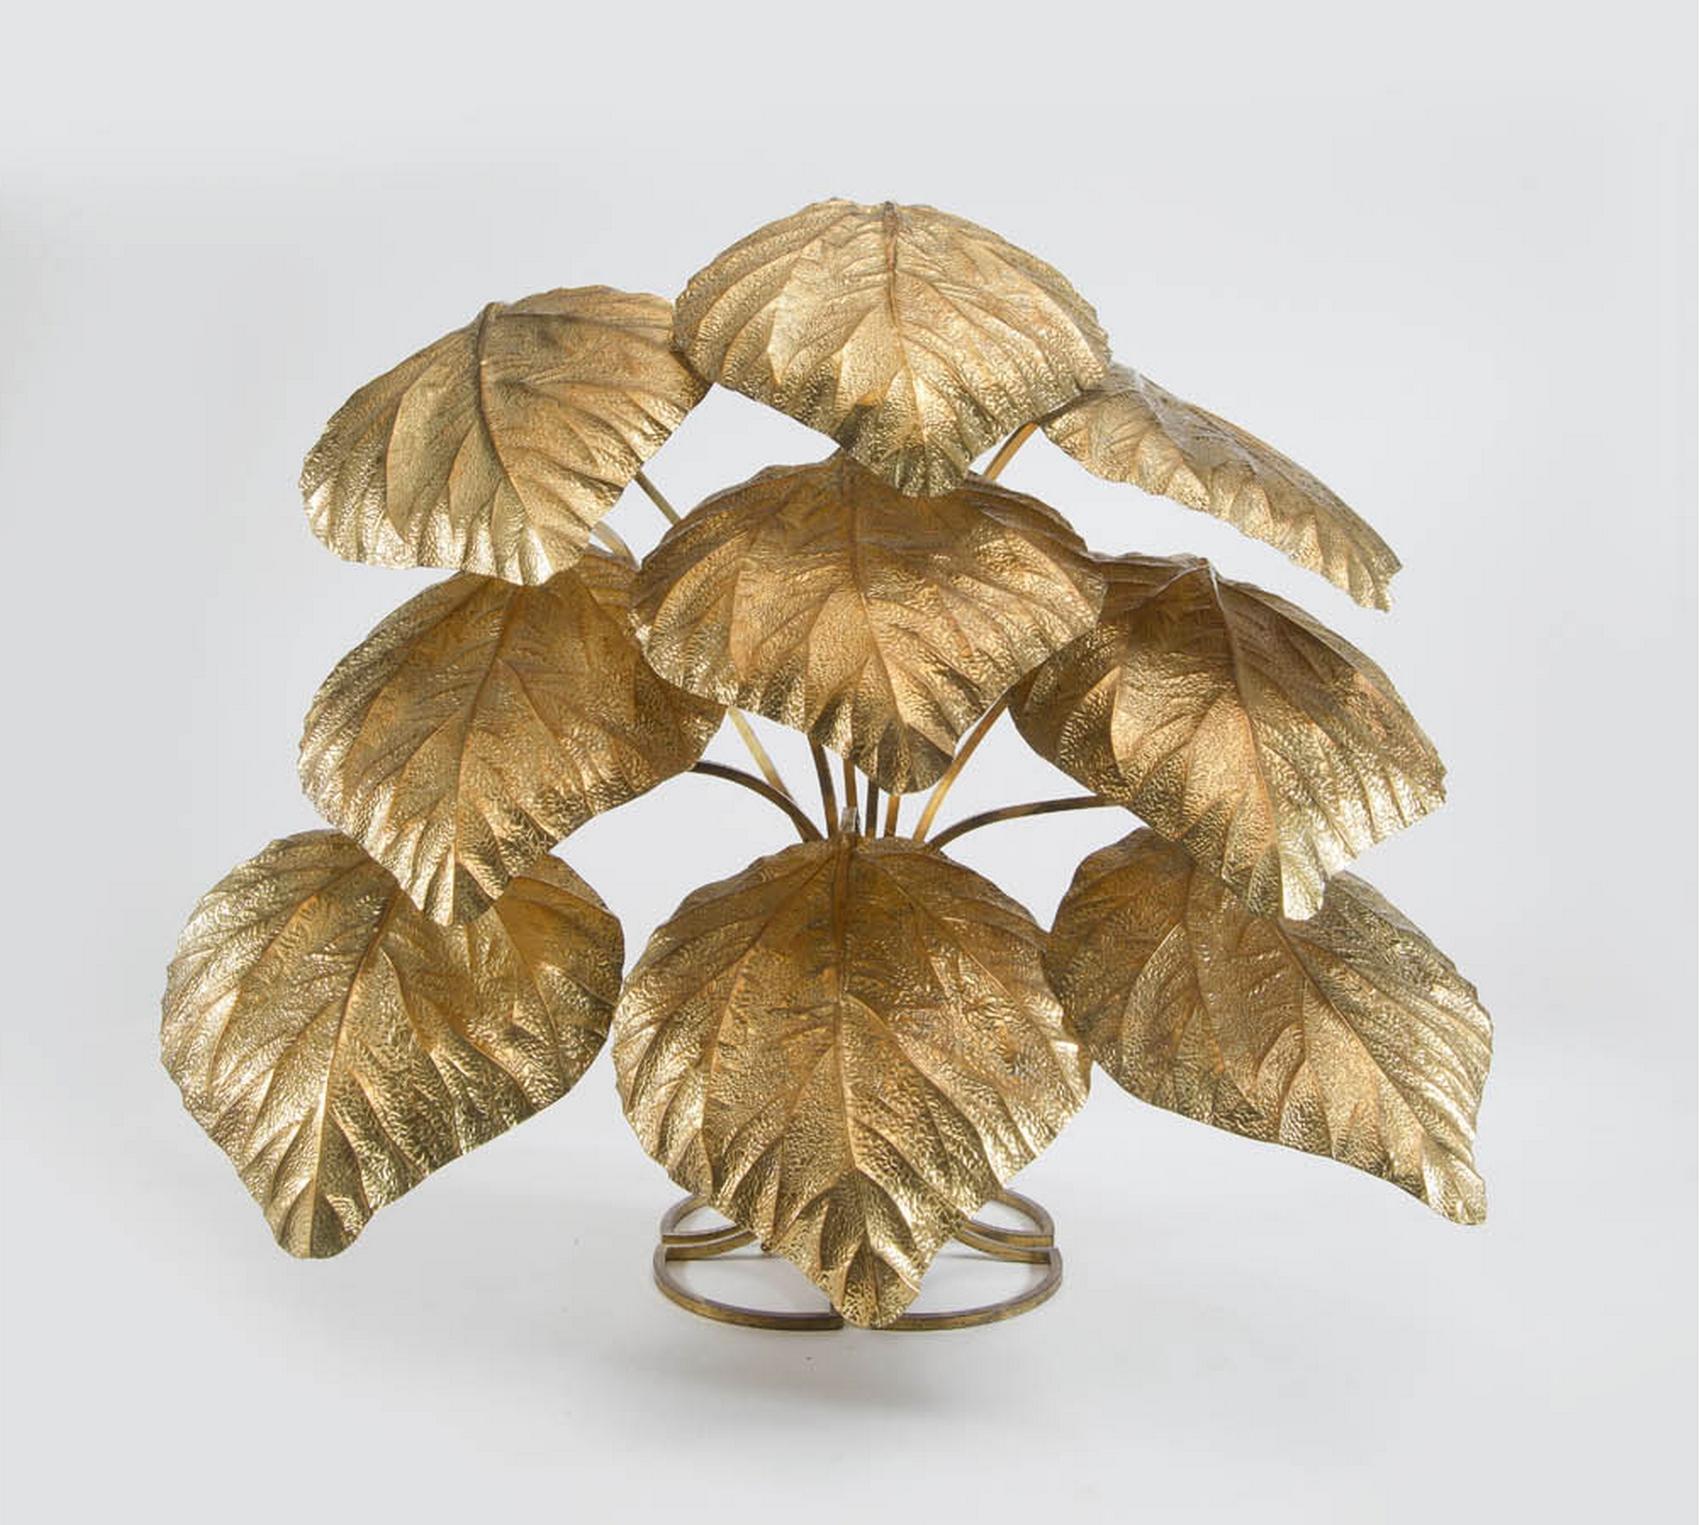 Impressive floor lamp designed by Carlo Giorgi for Bottega Gadda, Italy in the 1970s, composed by nine leaves mounted on ball joints and hidden six electric bulbs, made entirely of polished brass.

Measures: Width: 50 in
Height: 51.18 in
Depth: